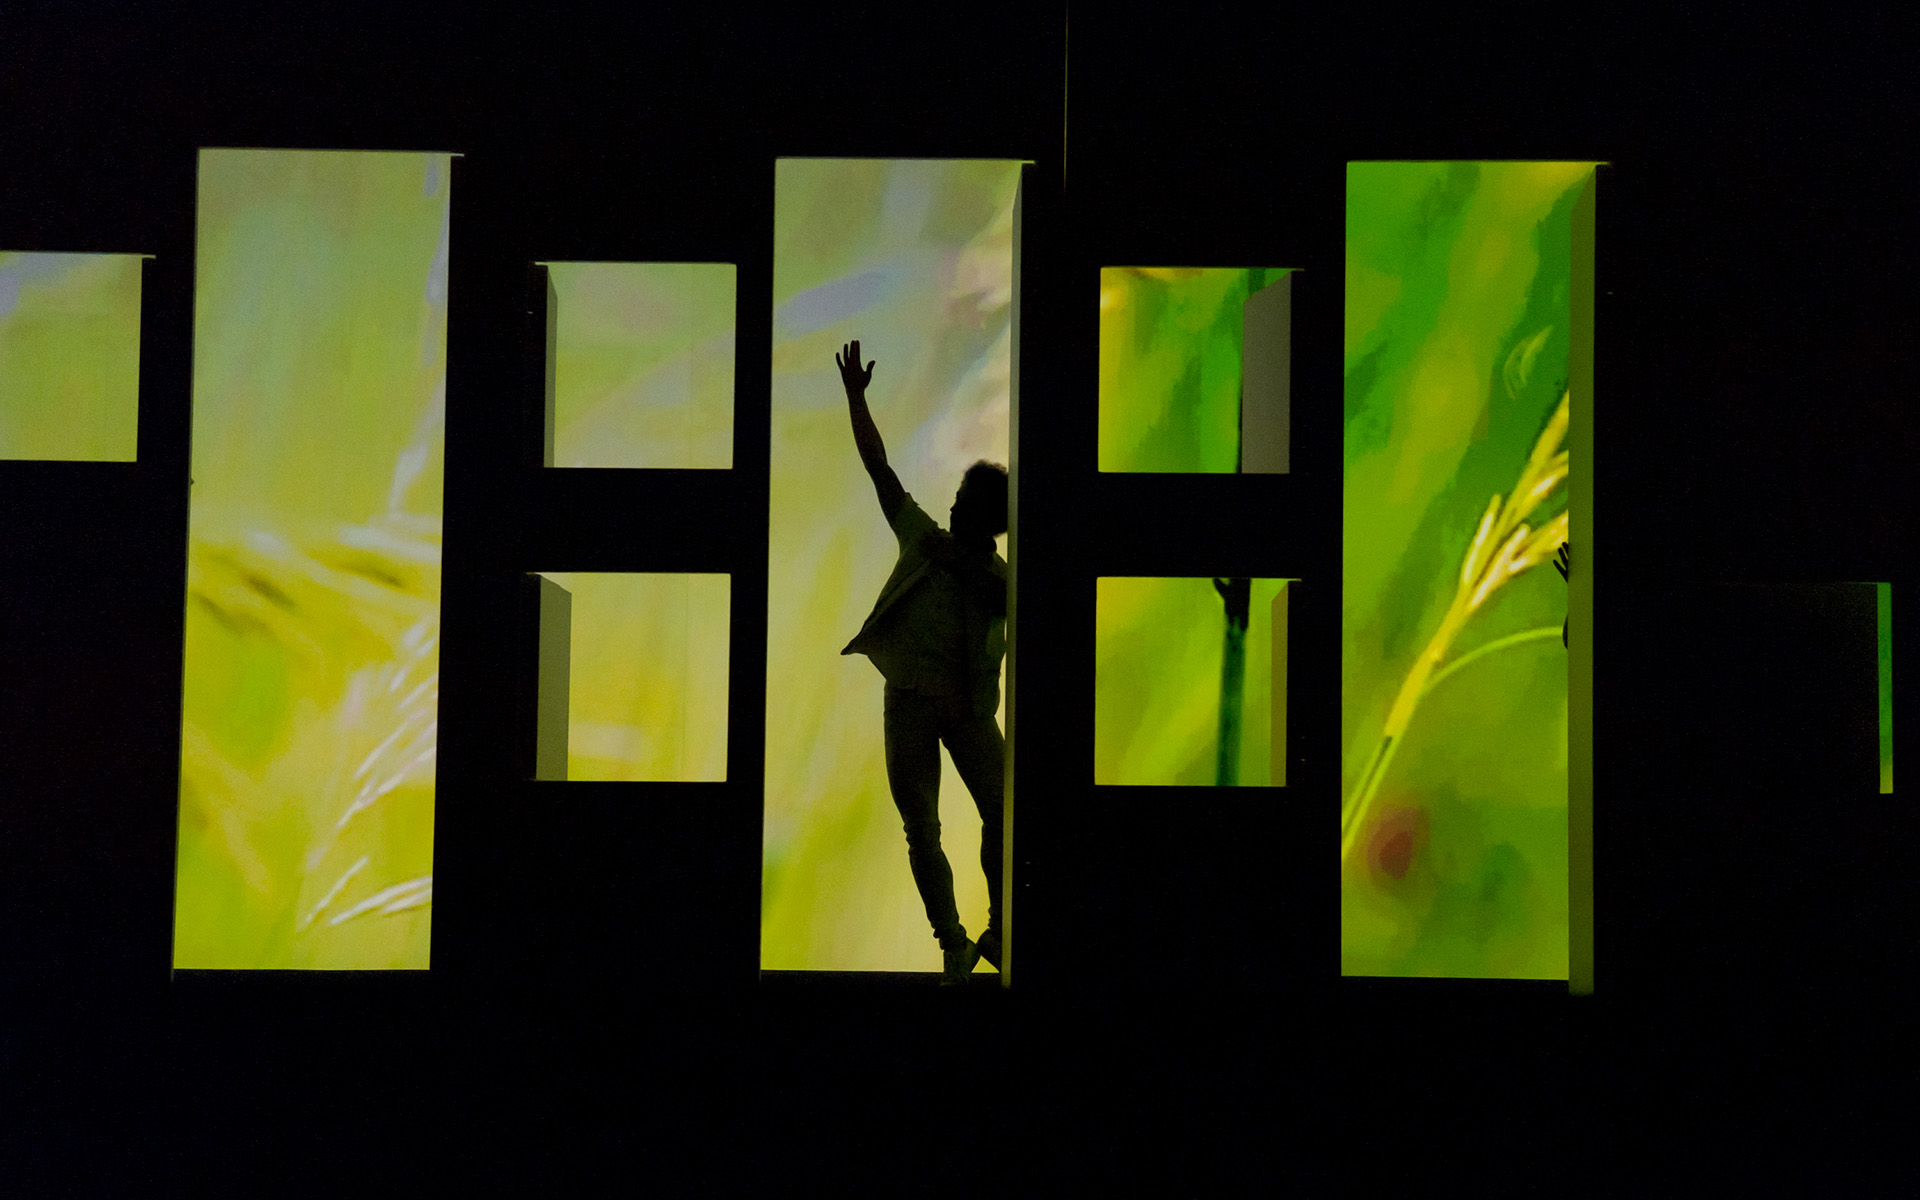 Dance Gala 2017 photo. Male dancer in silhouette dancing in the doorway, bright green background.